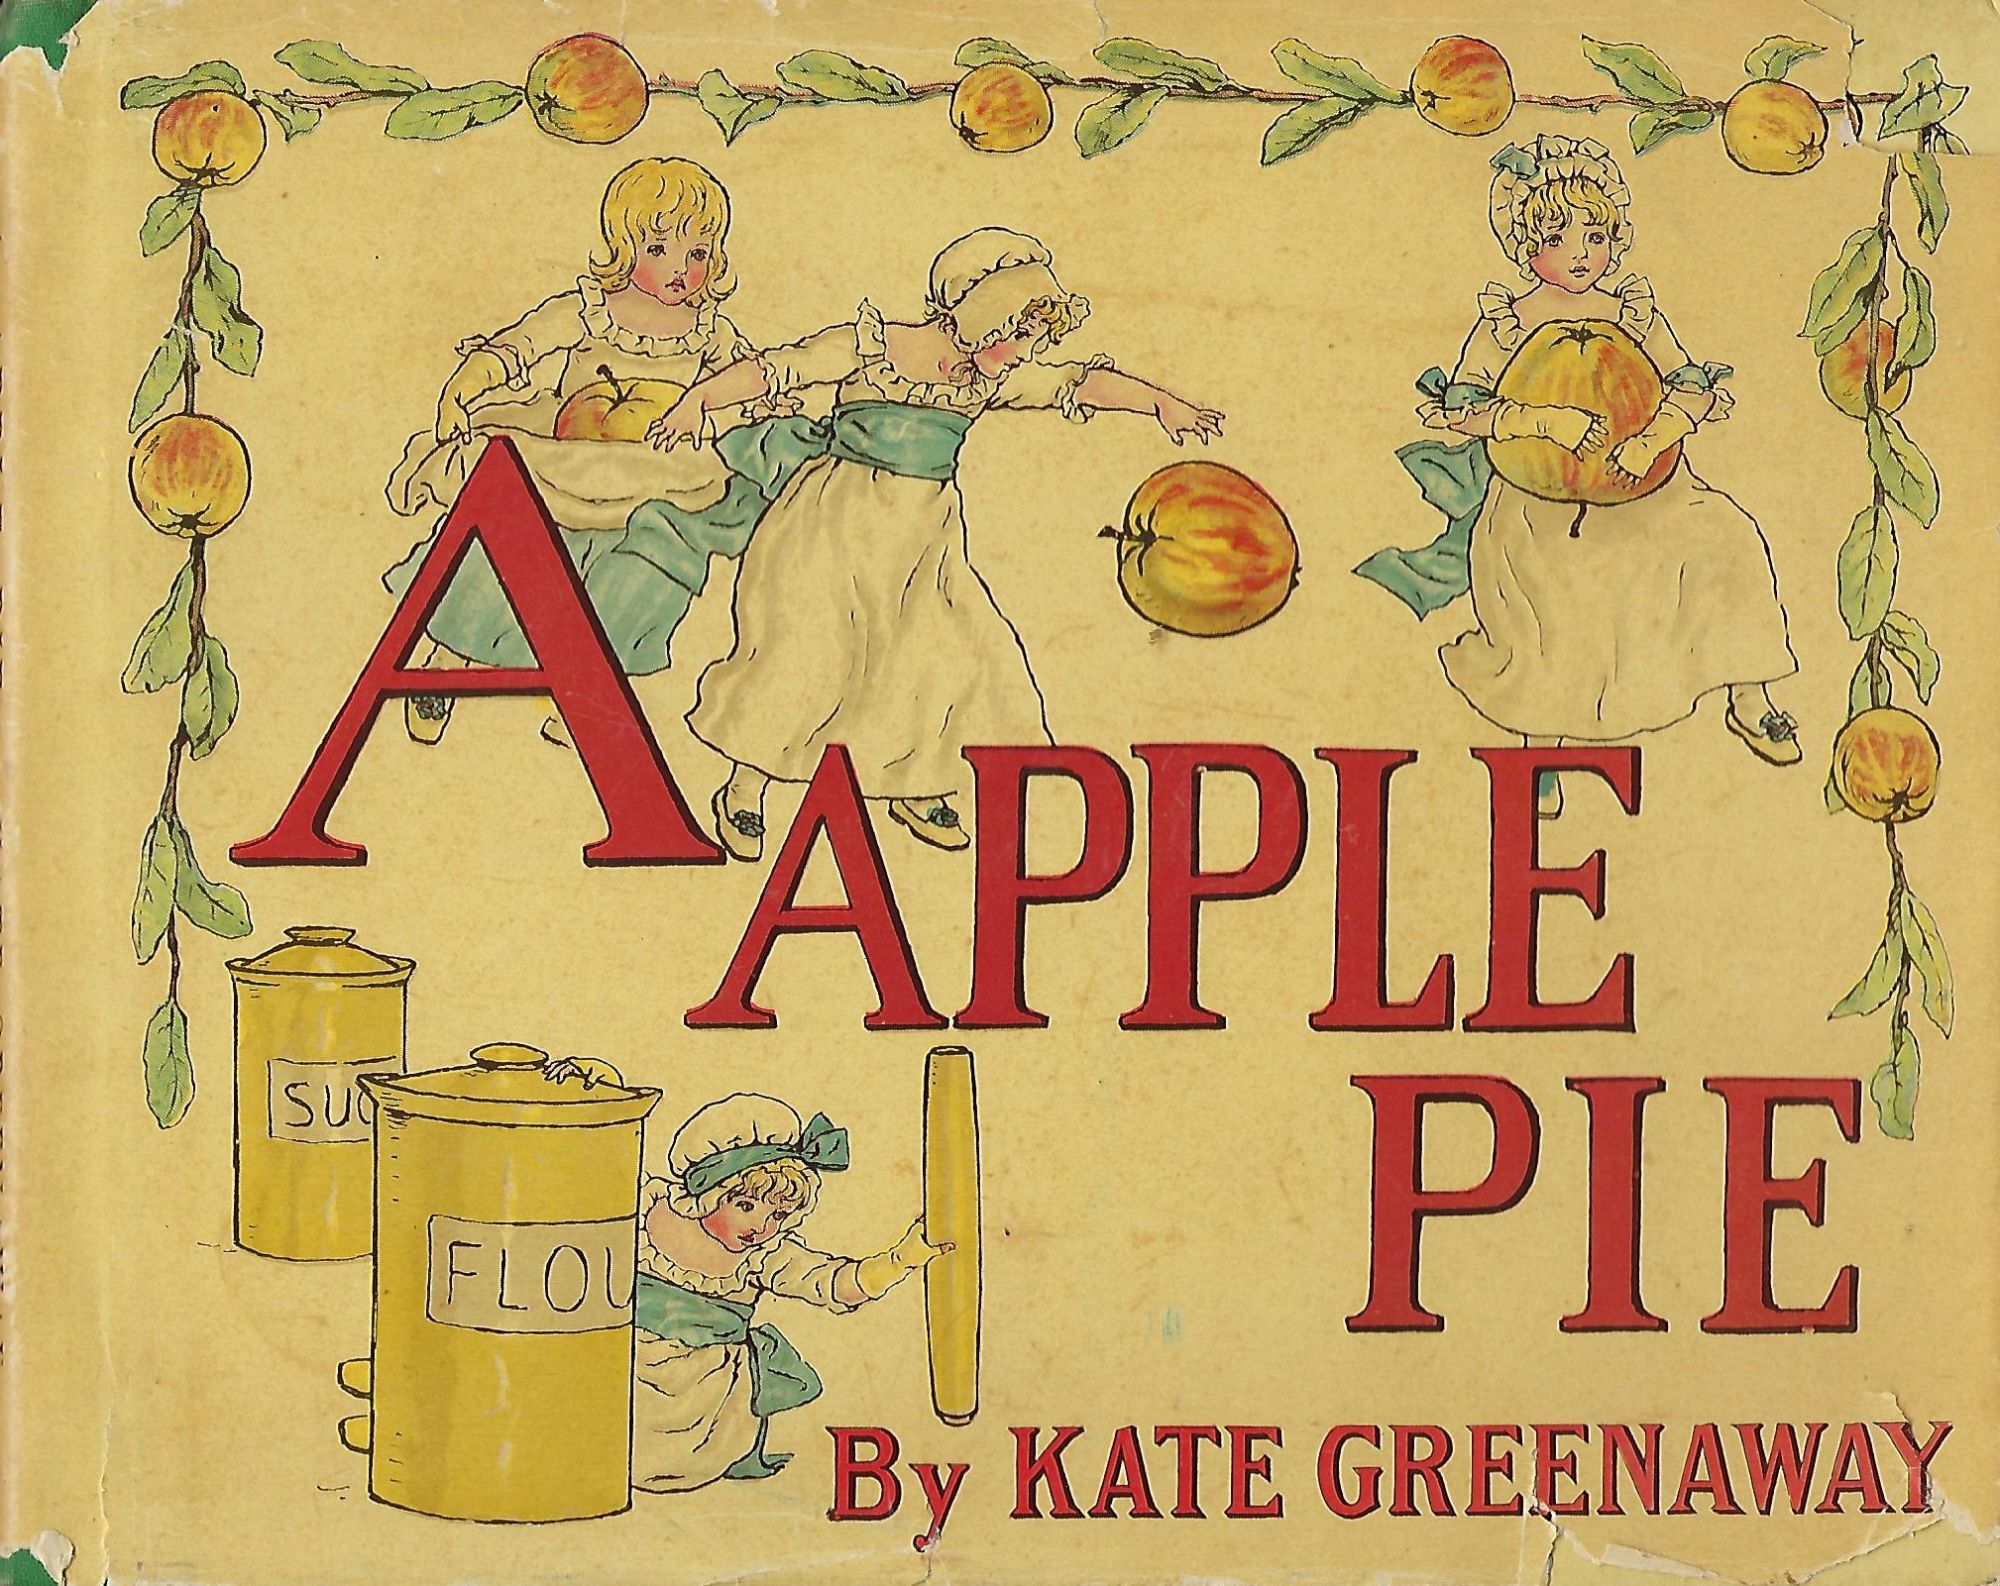 A APPLE PIE by Kate GREENAWAY on Antic Hay Rare Books